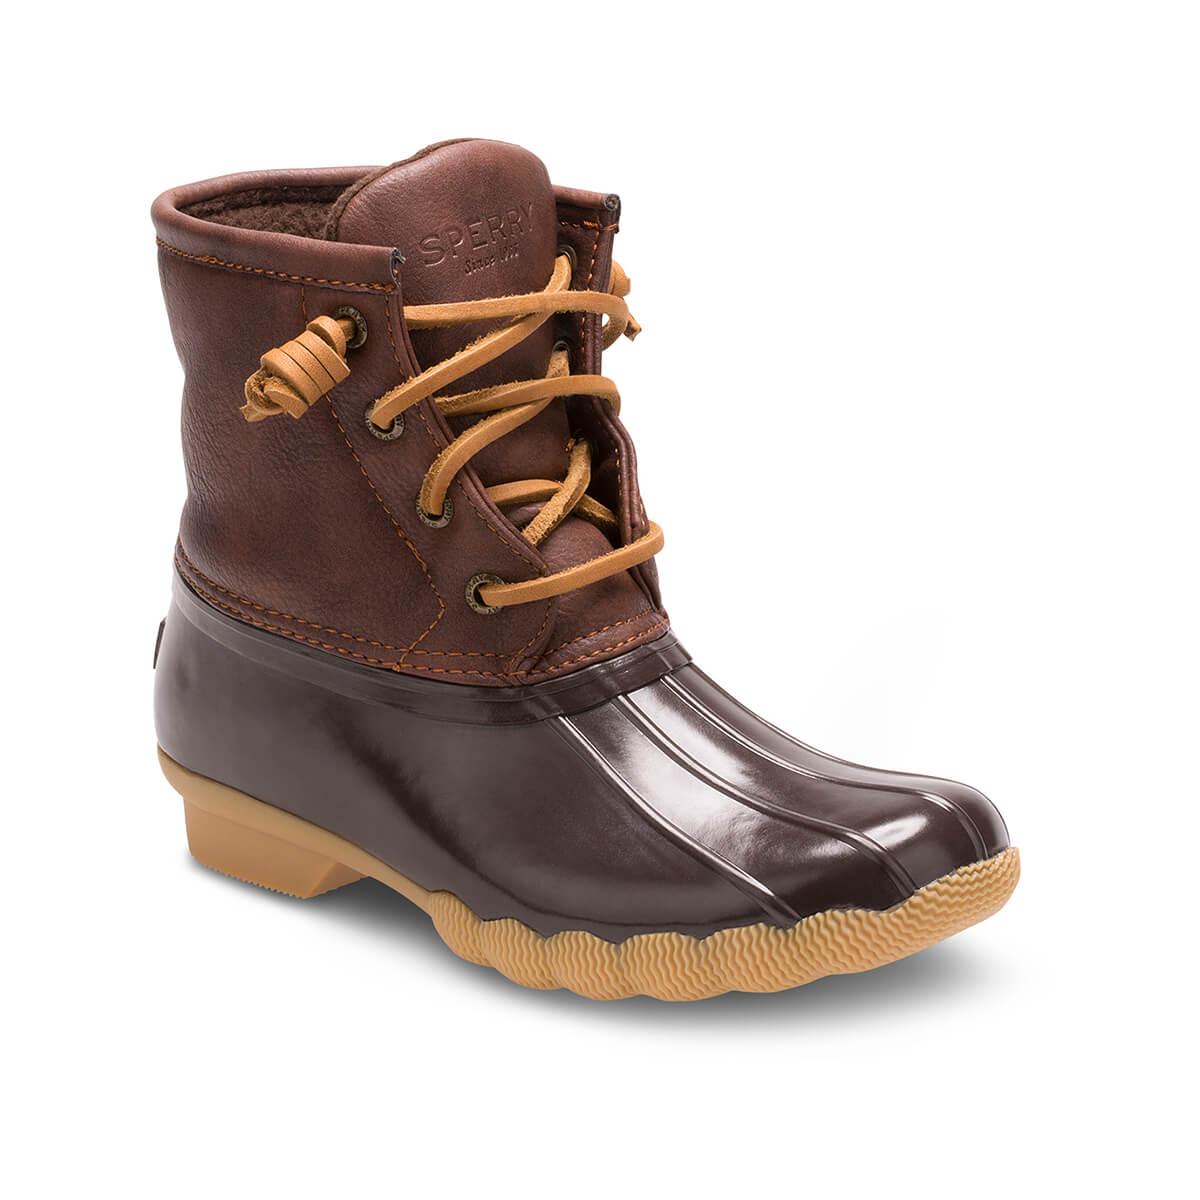 top sider duck boots